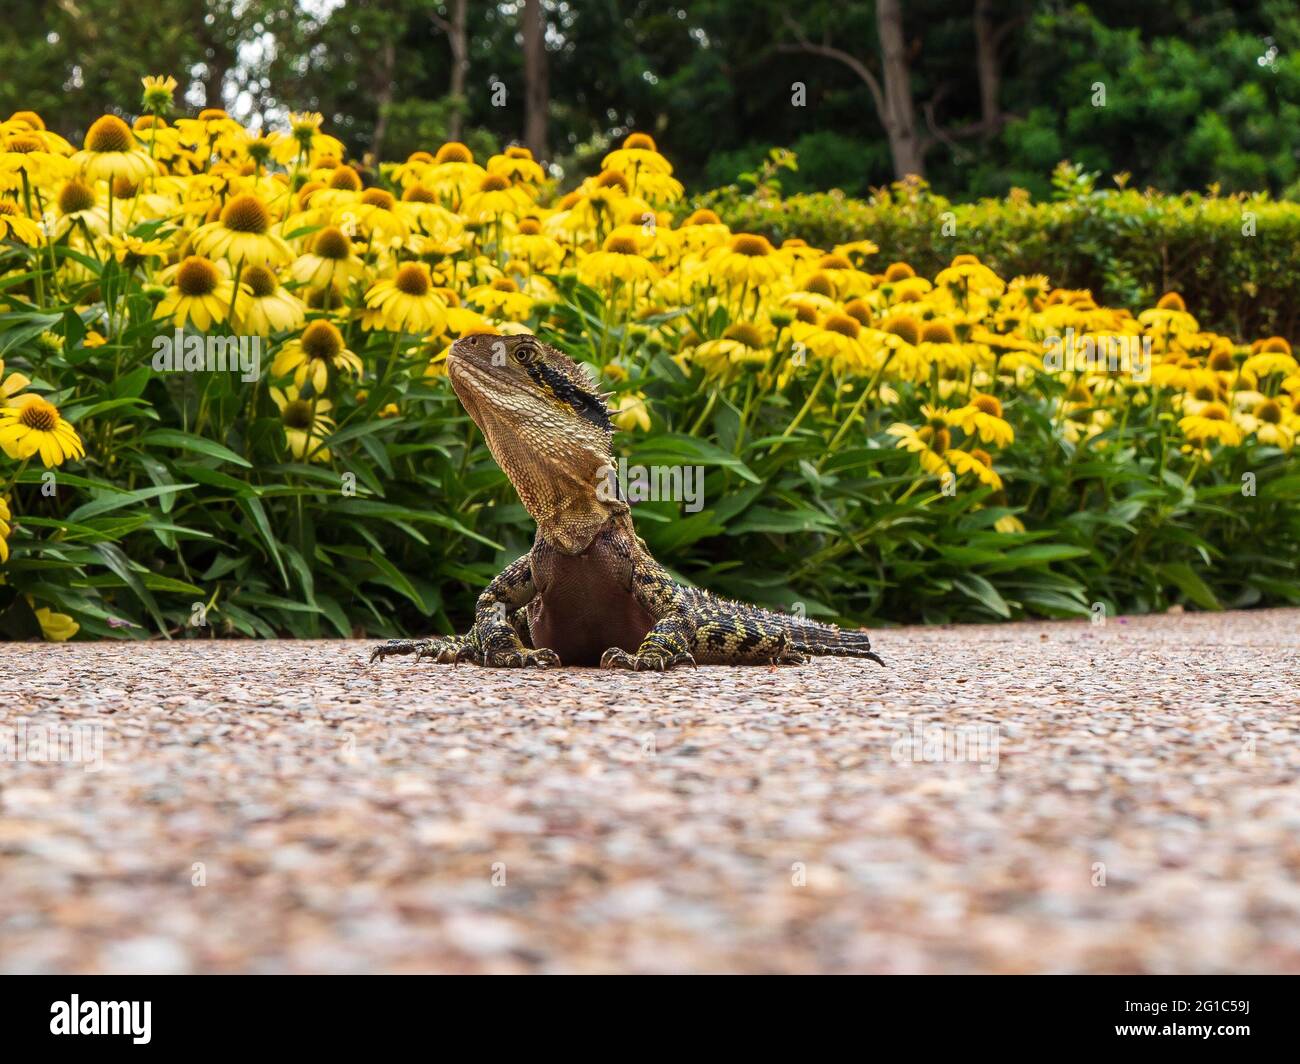 Australian lizard in a park surrounded by yellow flowers and the greenery of a public garden. Stock Photo